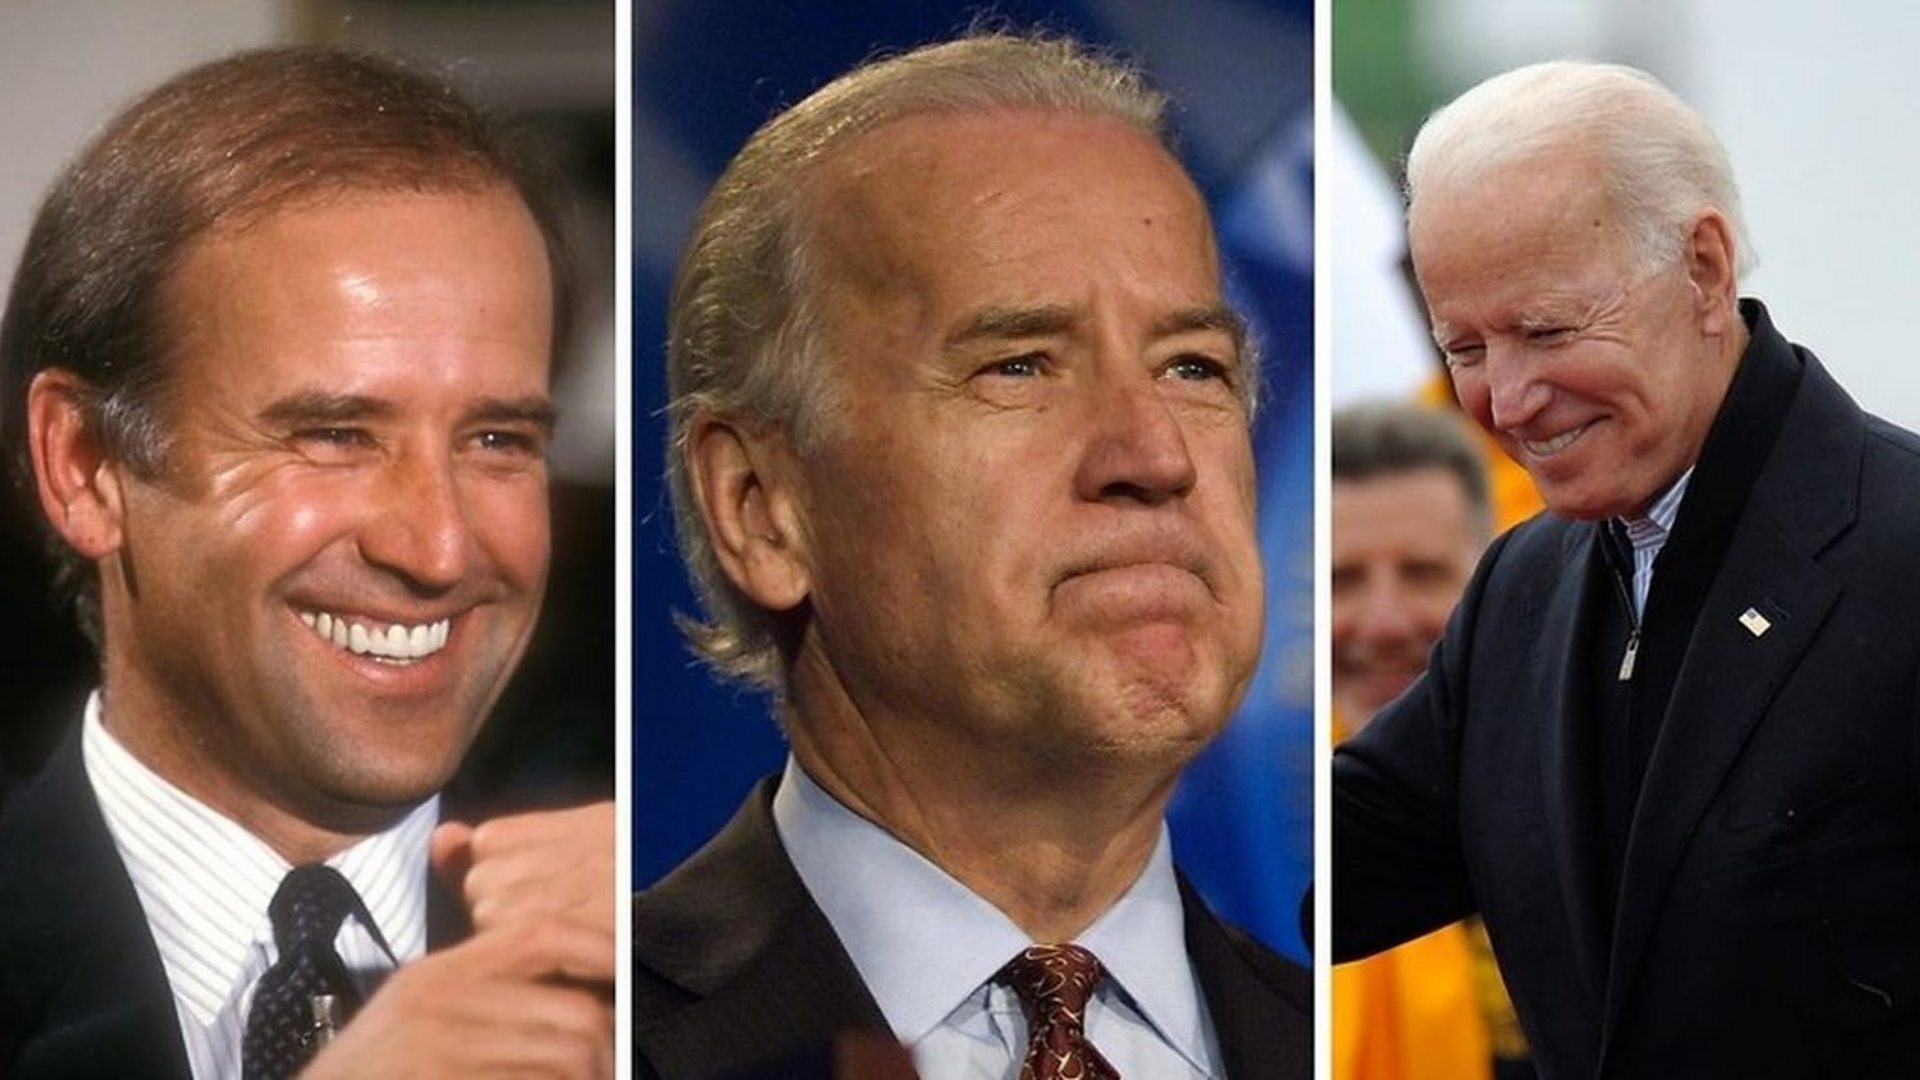 what time is biden on morning joe - Biden|President|Joe|Years|Trump|Delaware|Vice|Time|Obama|Senate|States|Law|Age|Campaign|Election|Administration|Family|House|Senator|Office|School|Wife|People|Hunter|University|Act|State|Year|Life|Party|Committee|Children|Beau|Daughter|War|Jill|Day|Facts|Americans|Presidency|Joe Biden|United States|Vice President|White House|Law School|President Trump|Foreign Relations Committee|Donald Trump|President Biden|Presidential Campaign|Presidential Election|Democratic Party|Syracuse University|United Nations|Net Worth|Barack Obama|Judiciary Committee|Neilia Hunter|U.S. Senate|Hillary Clinton|New York Times|Obama Administration|Empty Store Shelves|Systemic Racism|Castle County Council|Archmere Academy|U.S. Senator|Vice Presidency|Second Term|Biden Administration